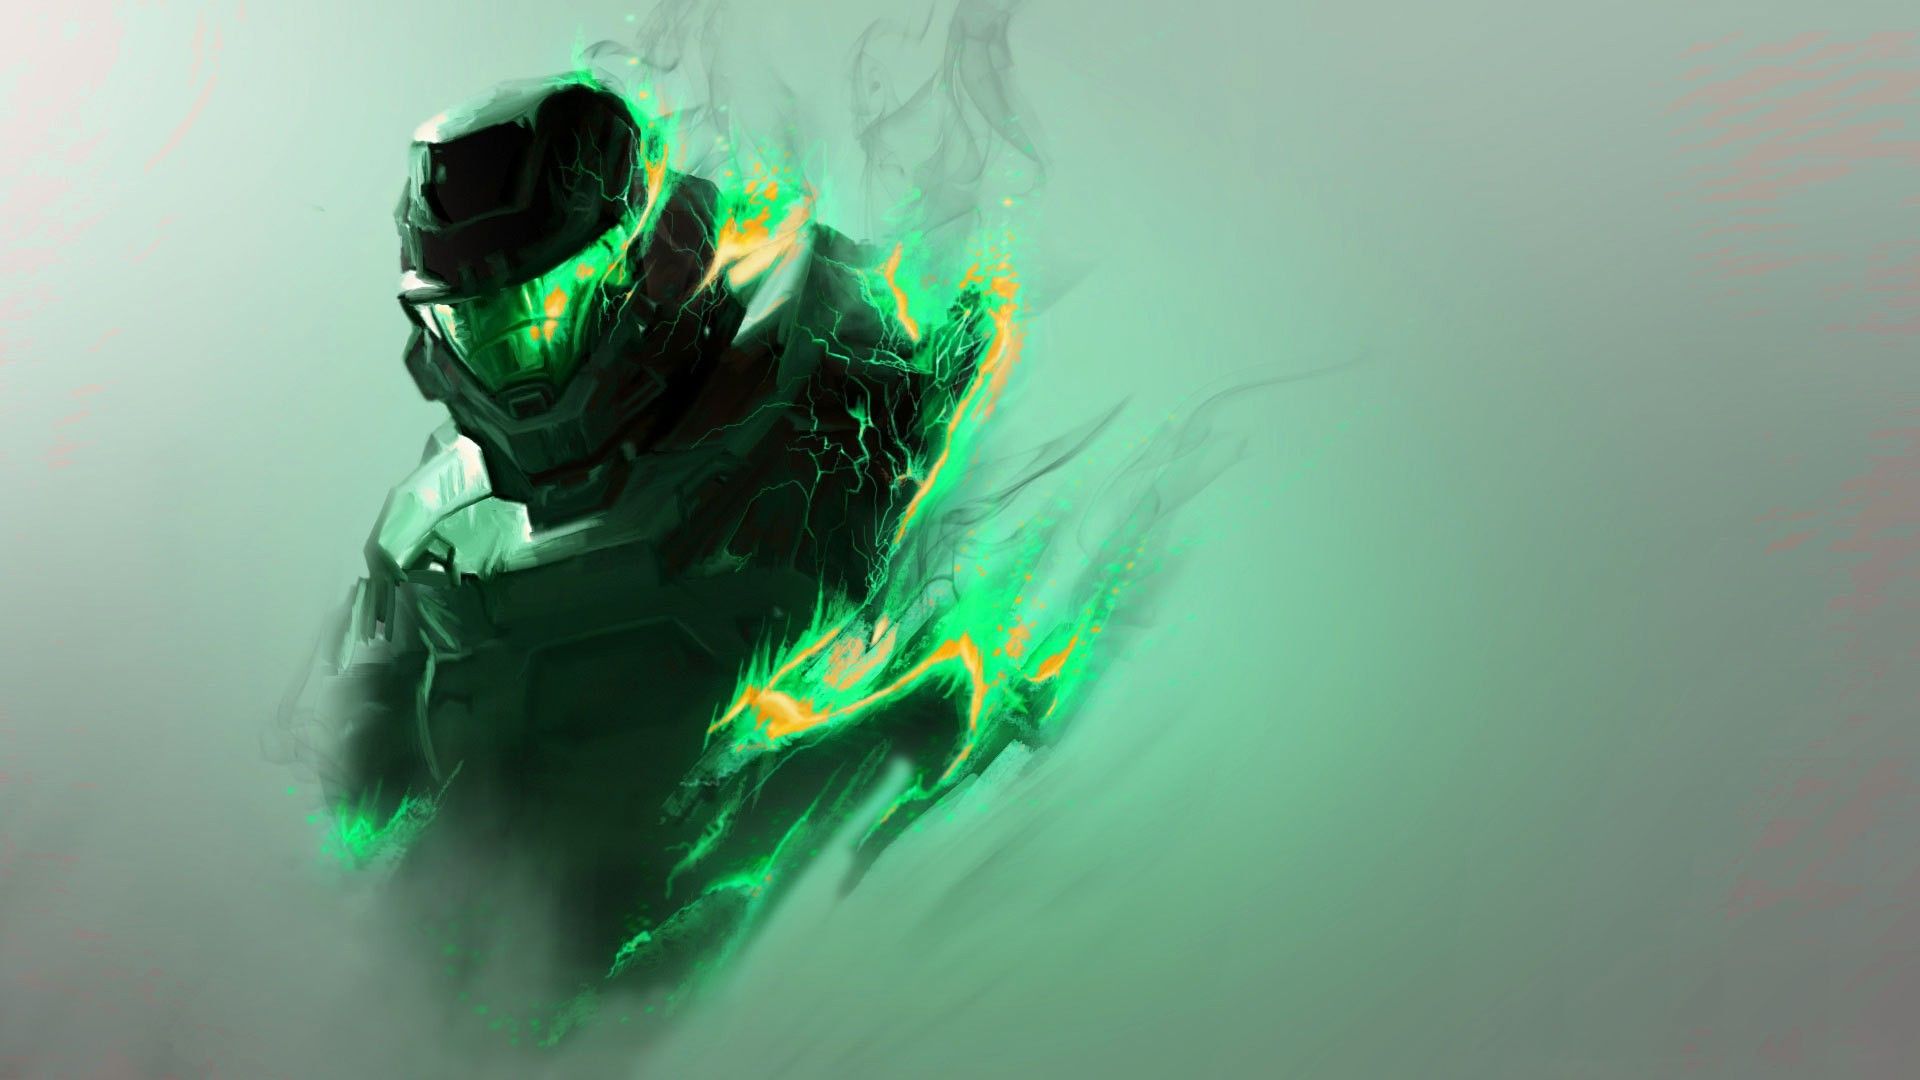 Halo Master Chief Artwork Wallpapers